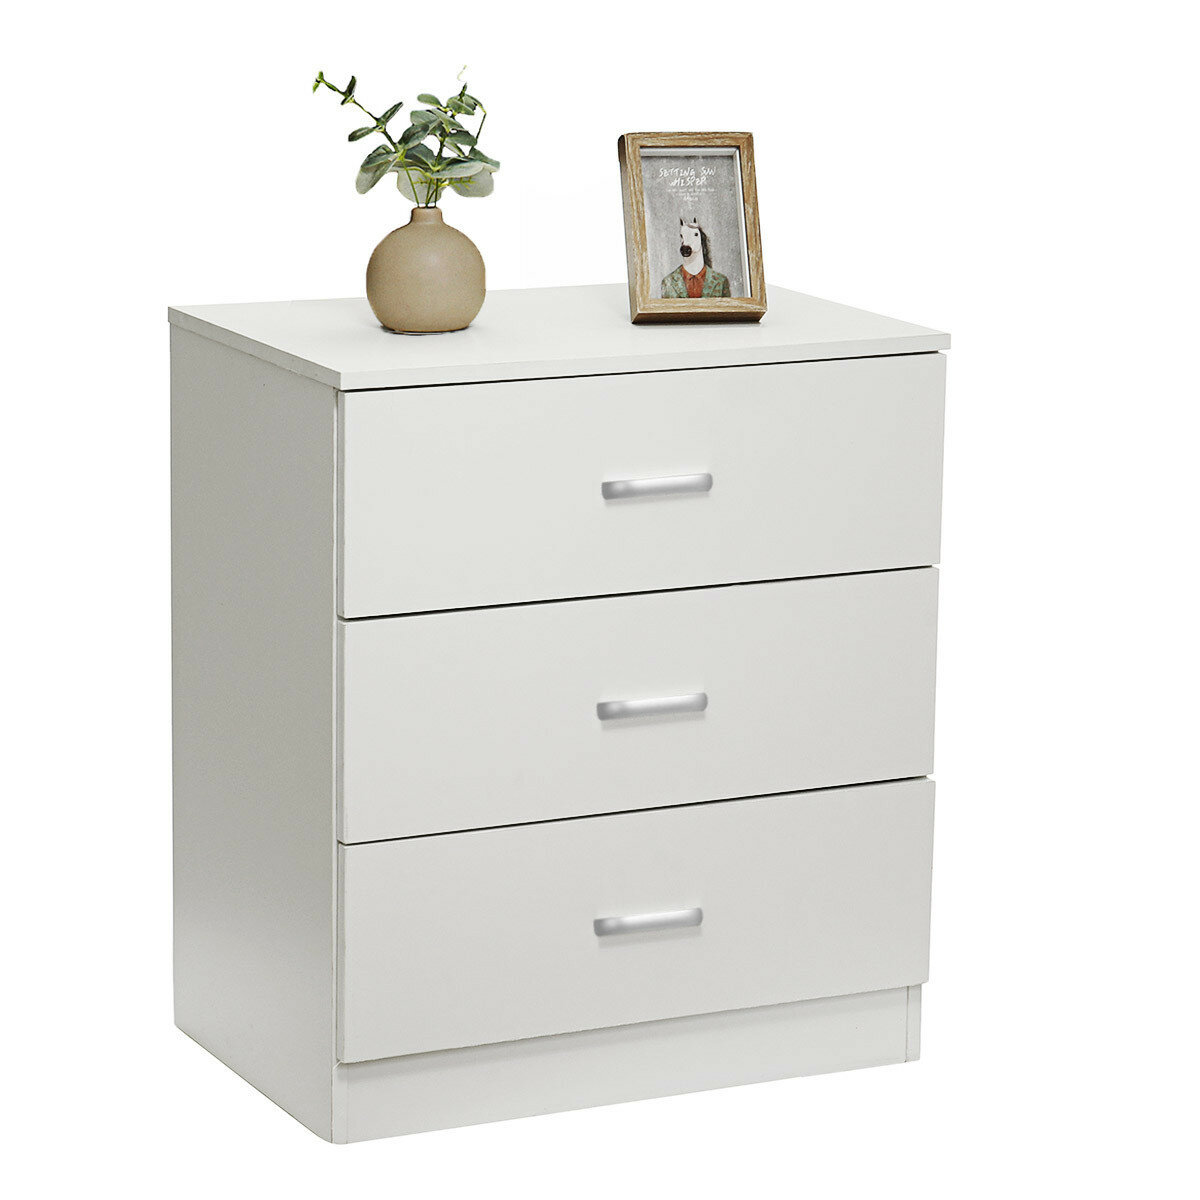 Image of Hommpa Modern Nightstand Chest of Drawers Bedside Table Cabinet Nightstand 3 Drawers Bedroom